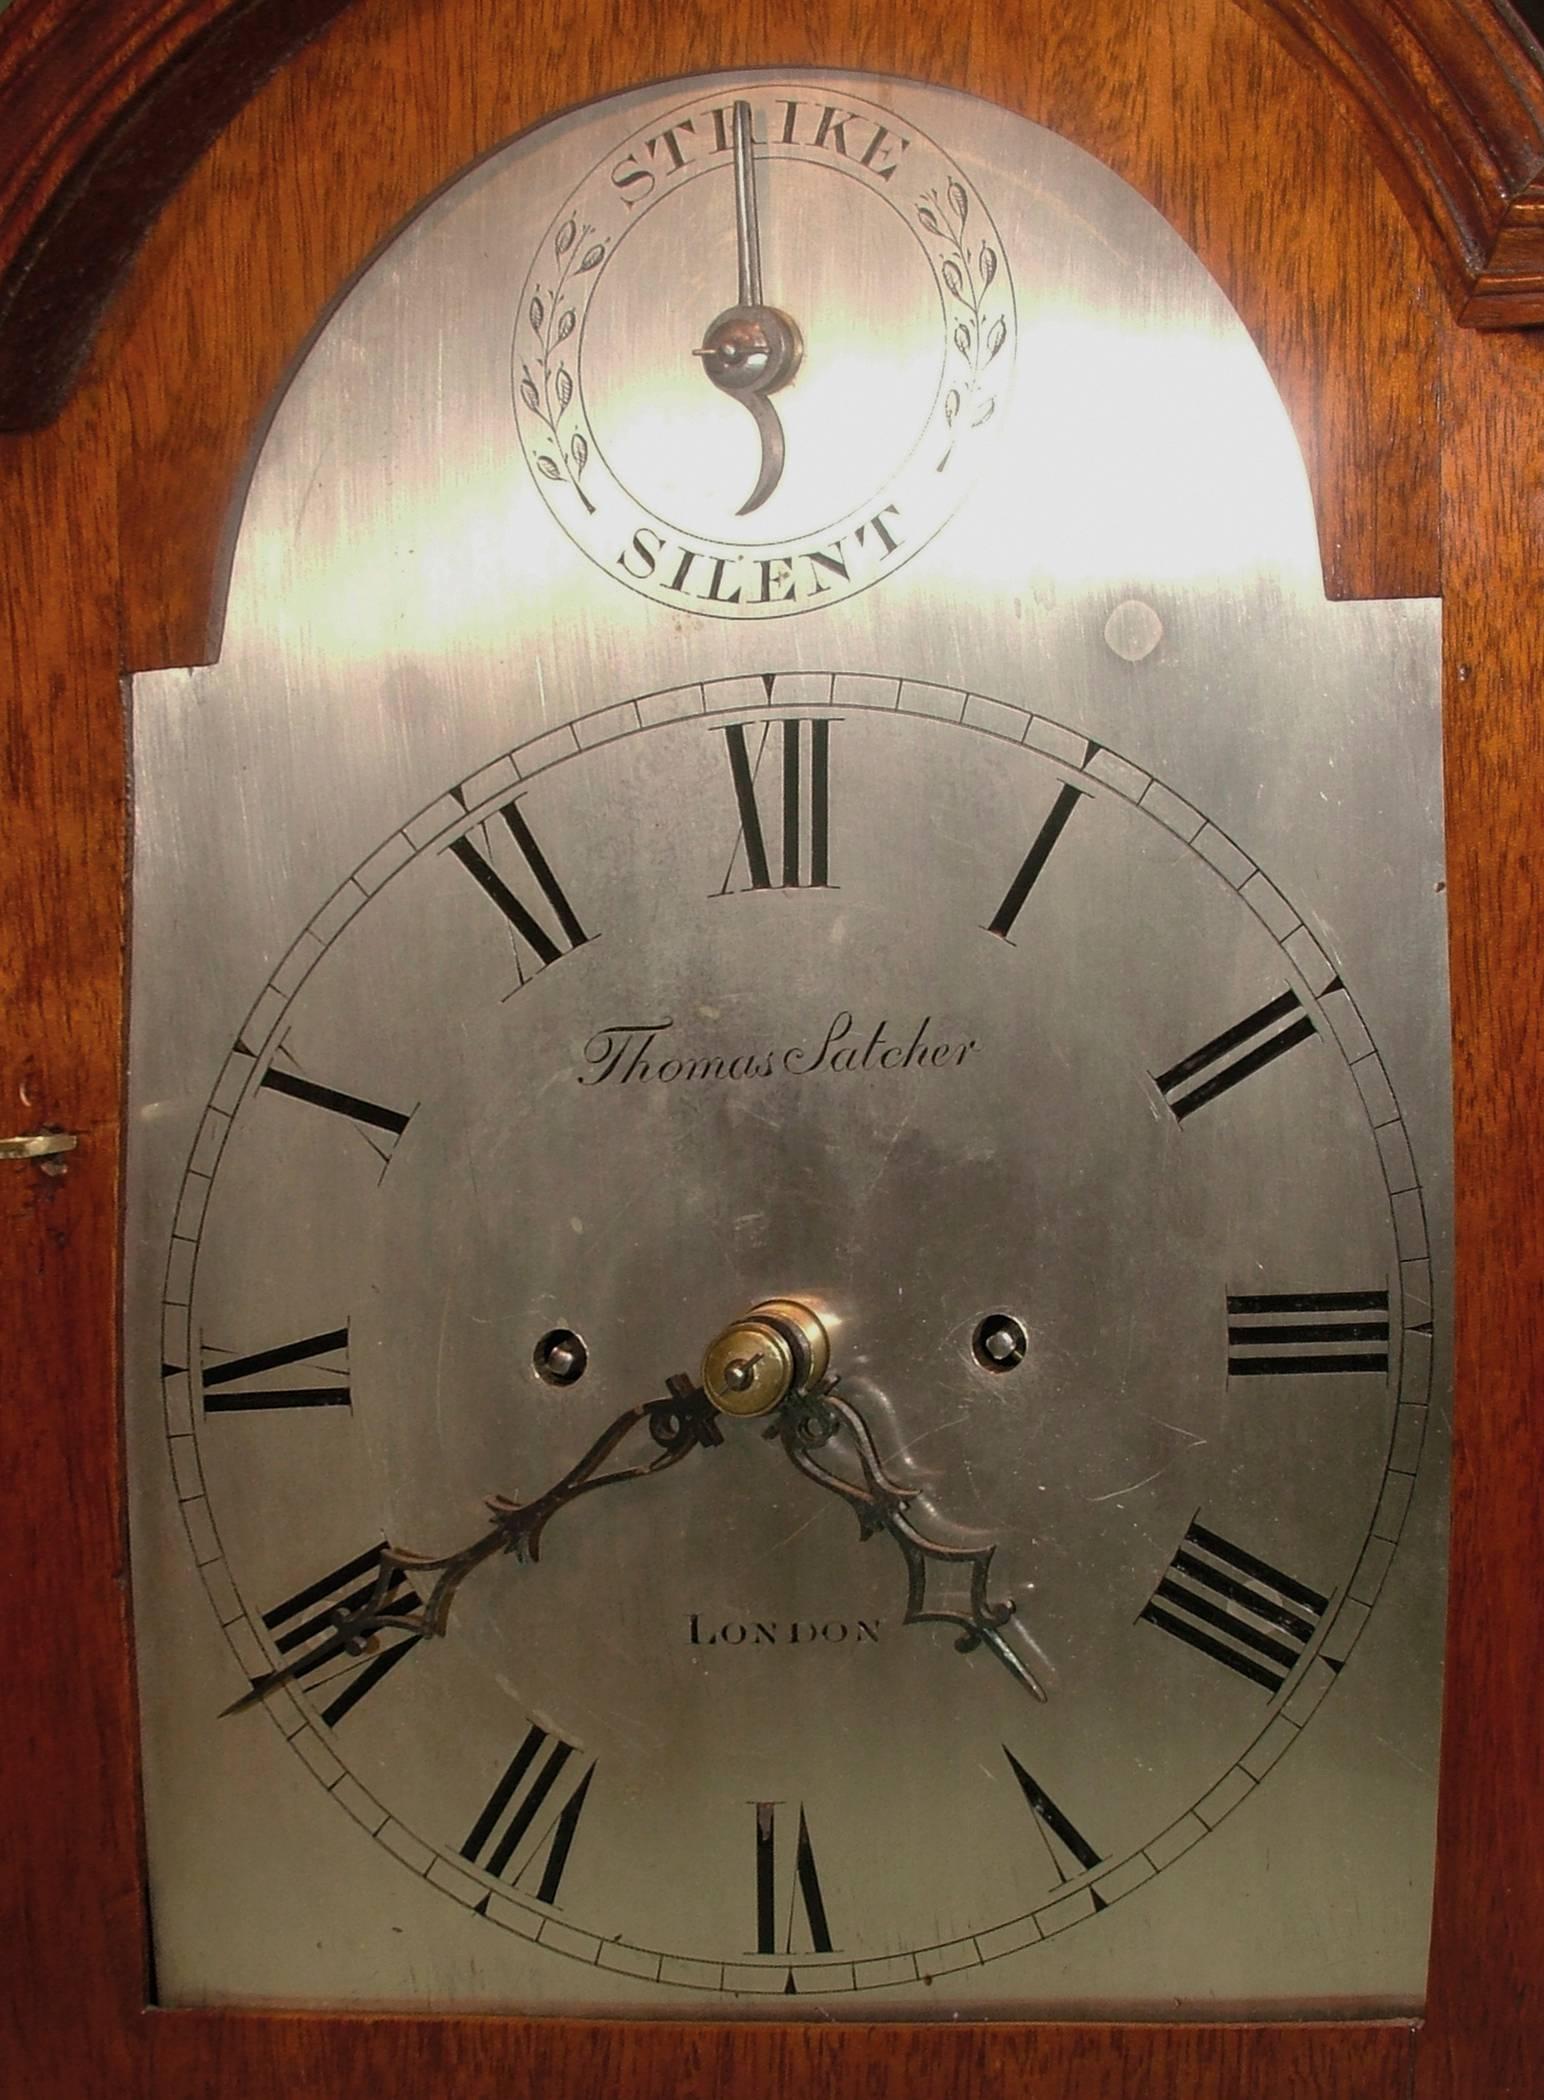 A late 18th century bracket clock by Thomas Satcher of London, having eight day striking movement with silver dial and finely engraved backplate, mounted in figured mahogany dome-top case with applied brass mouldings and well-shaped carrying handle,